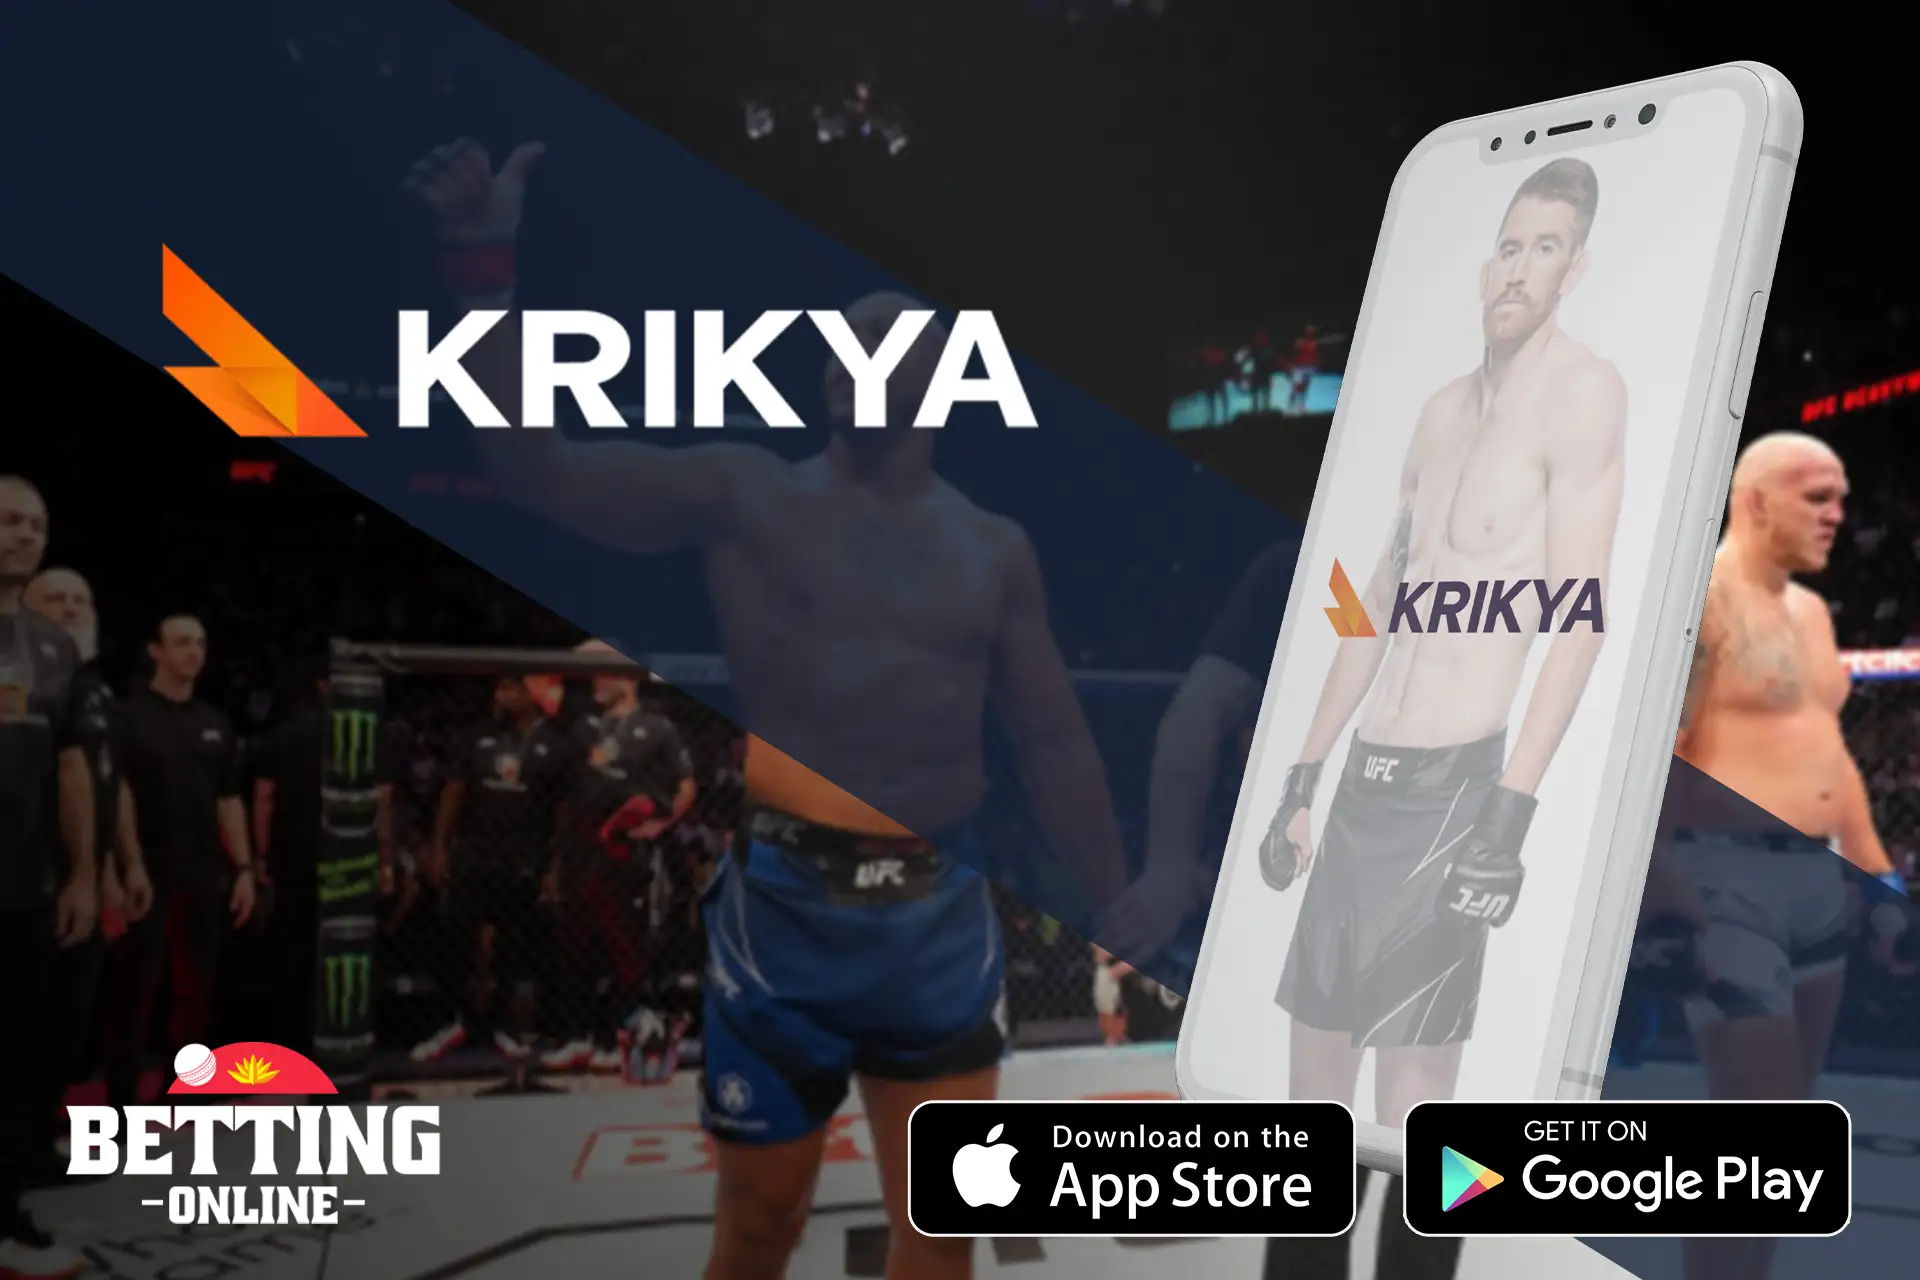 Krikya allows you to bet on all major UFC events and gives you a welcome bonus.